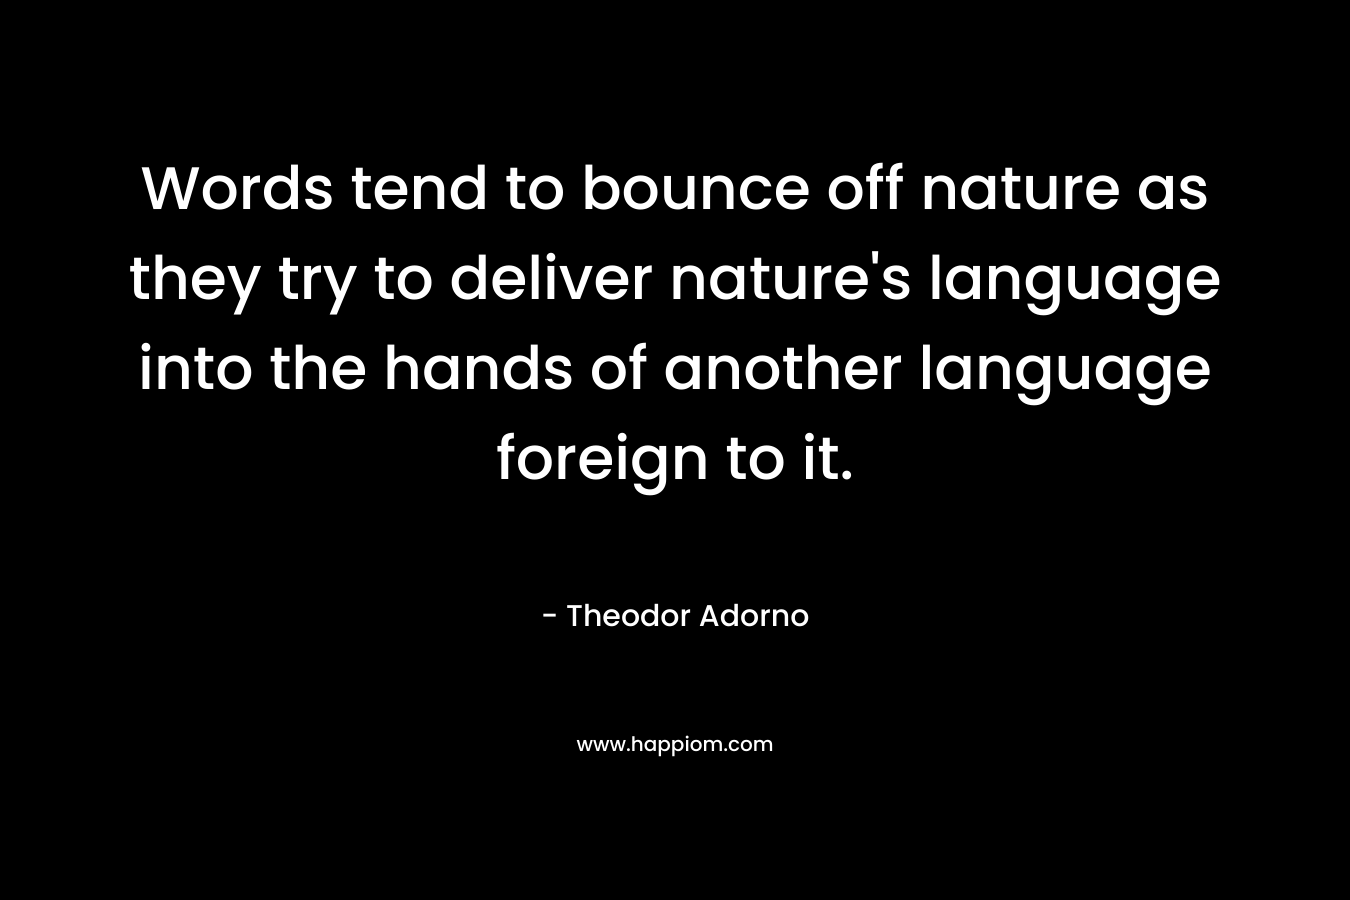 Words tend to bounce off nature as they try to deliver nature’s language into the hands of another language foreign to it. – Theodor Adorno